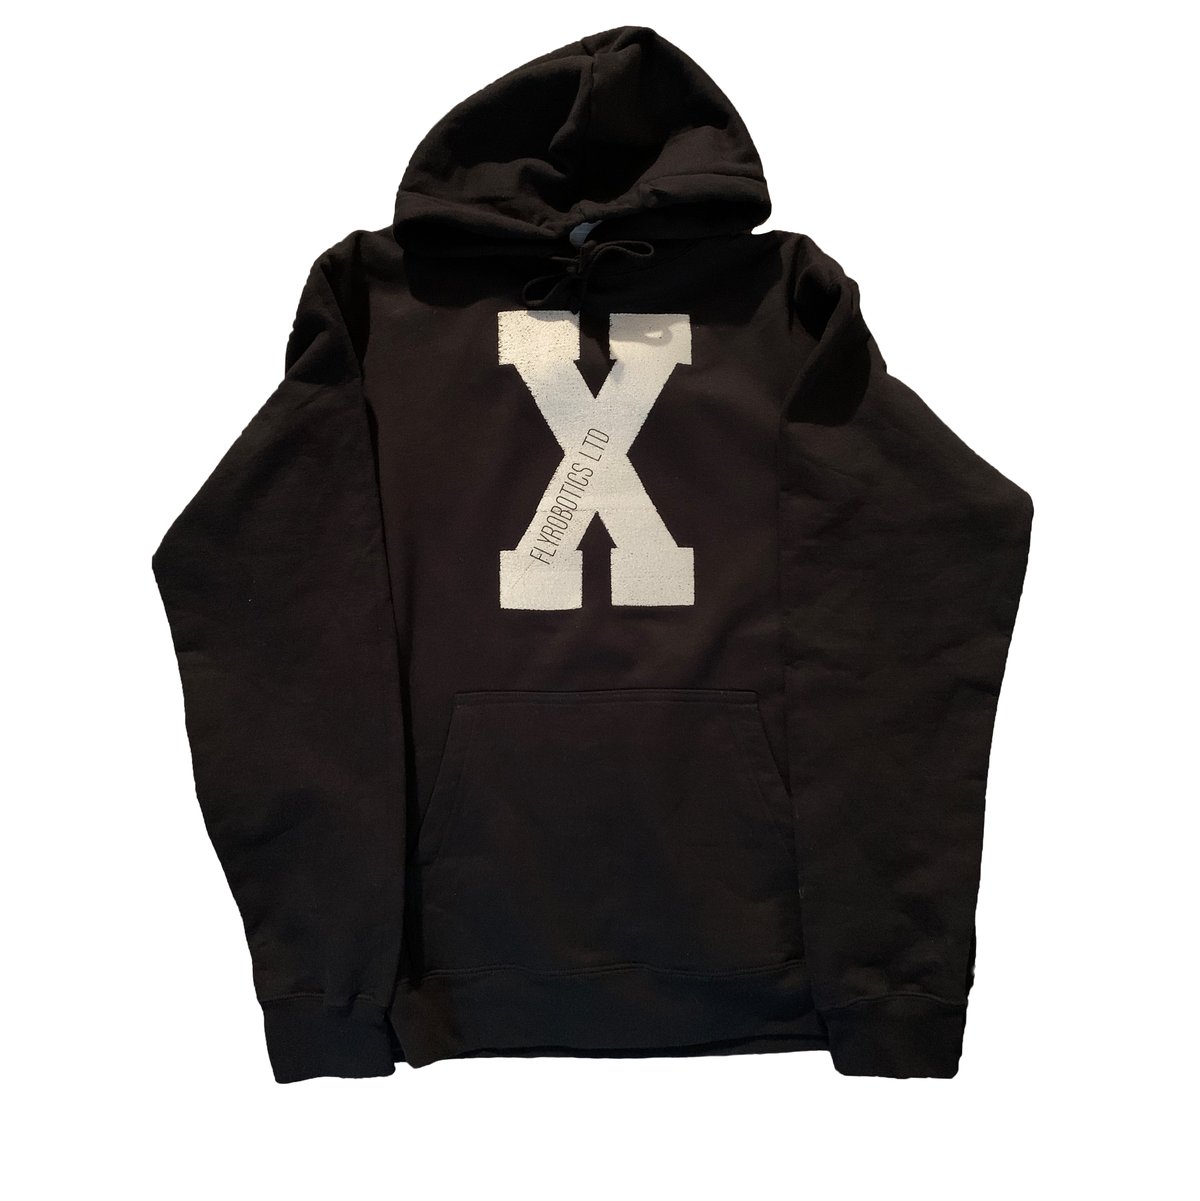 Image of "The X Hoodie" 